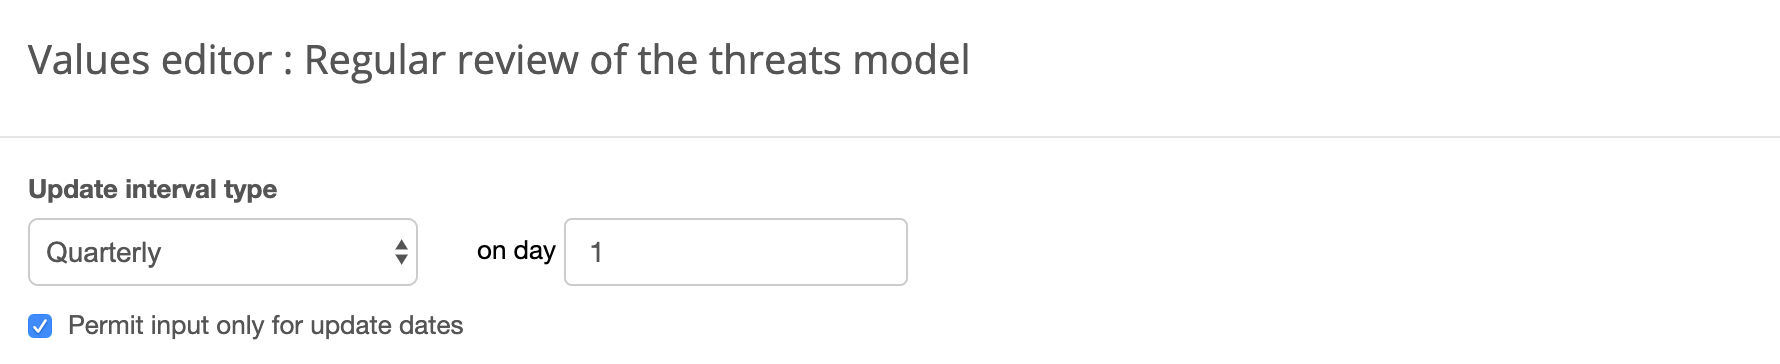 Quarterly update interval for threats model metric